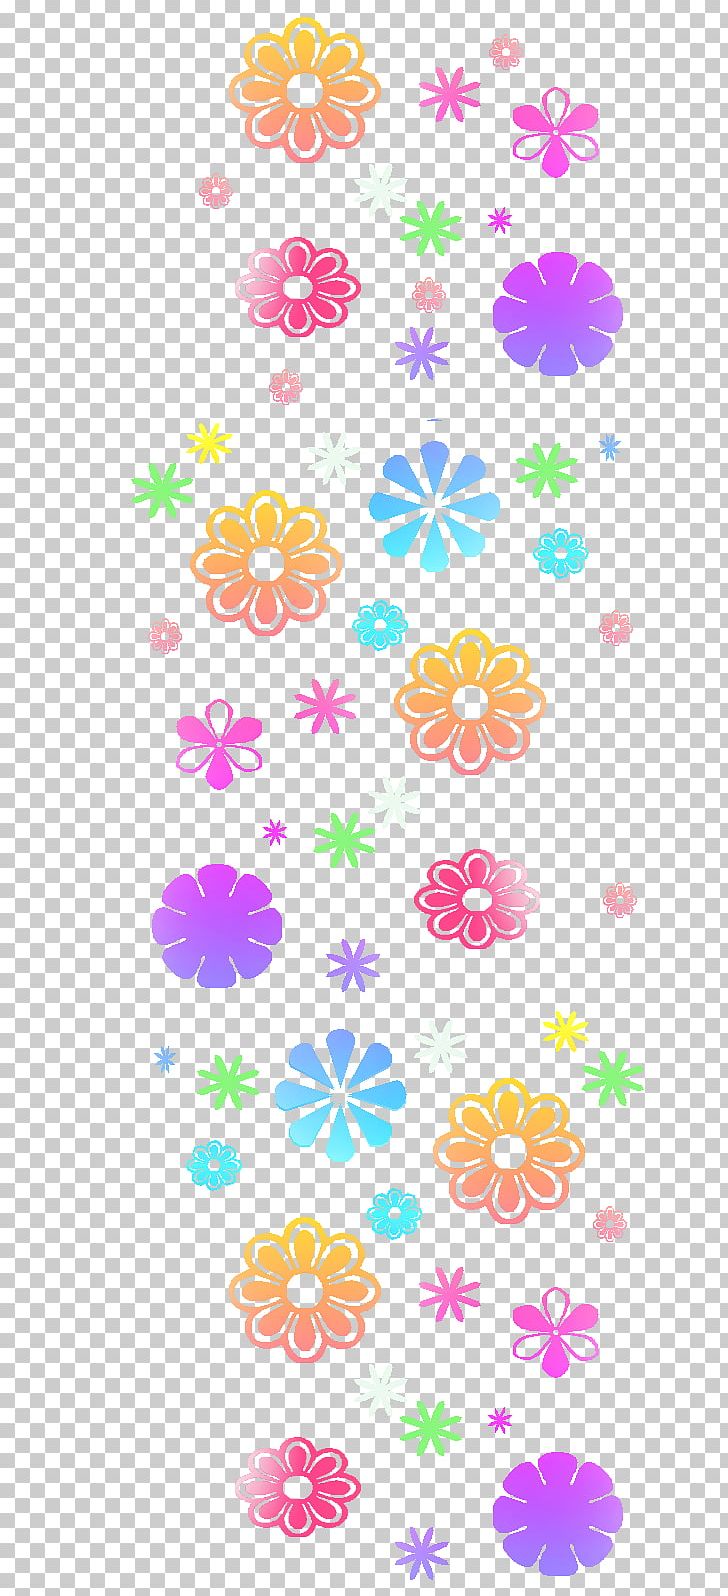 Windows Thumbnail Cache Directory Flower PNG, Clipart, Area, Blue Glow, Clip Art, Directory, Fimark Ltd Free PNG Download